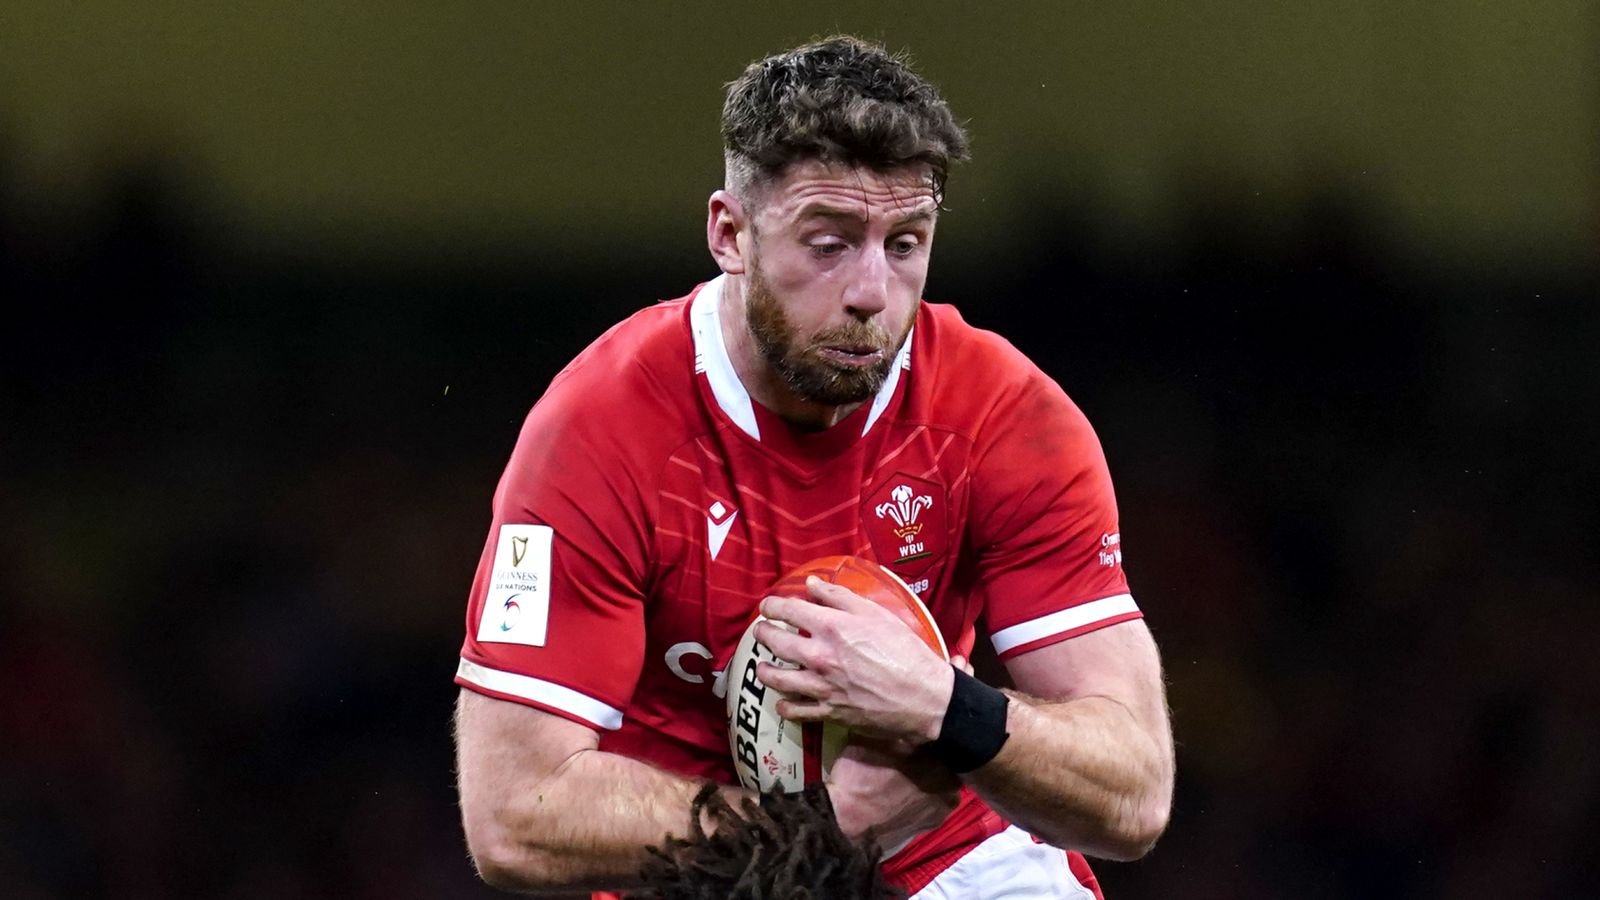 Alex Cuthbert replaces Josh Adams on wing in only Wales change for second Test vs South Africa